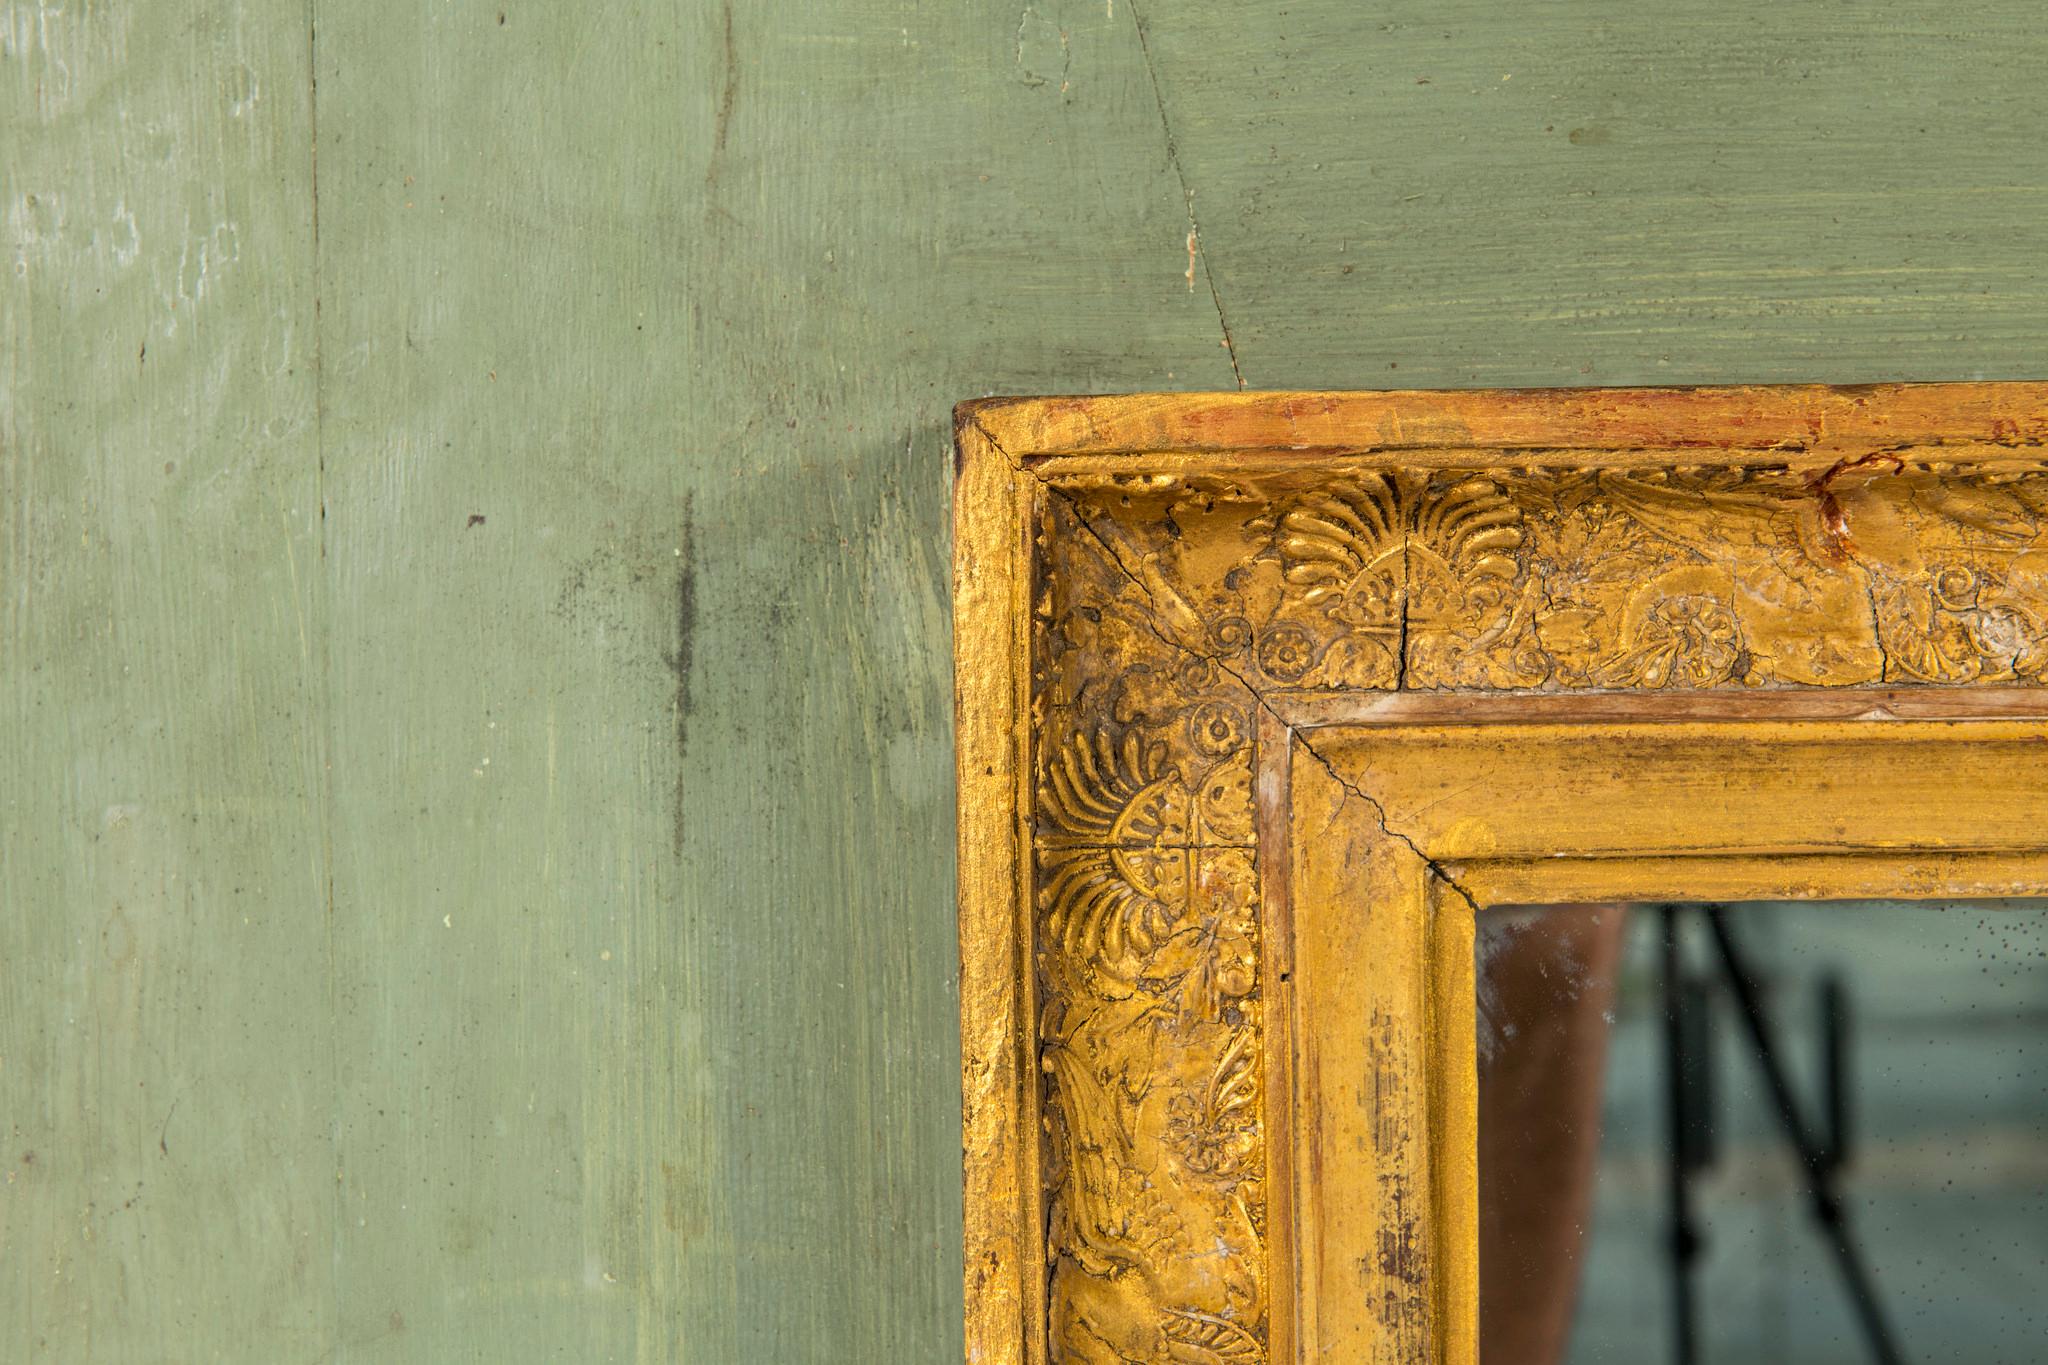 Gilt Early 19th Century Empire Trumeau Mirror For Sale